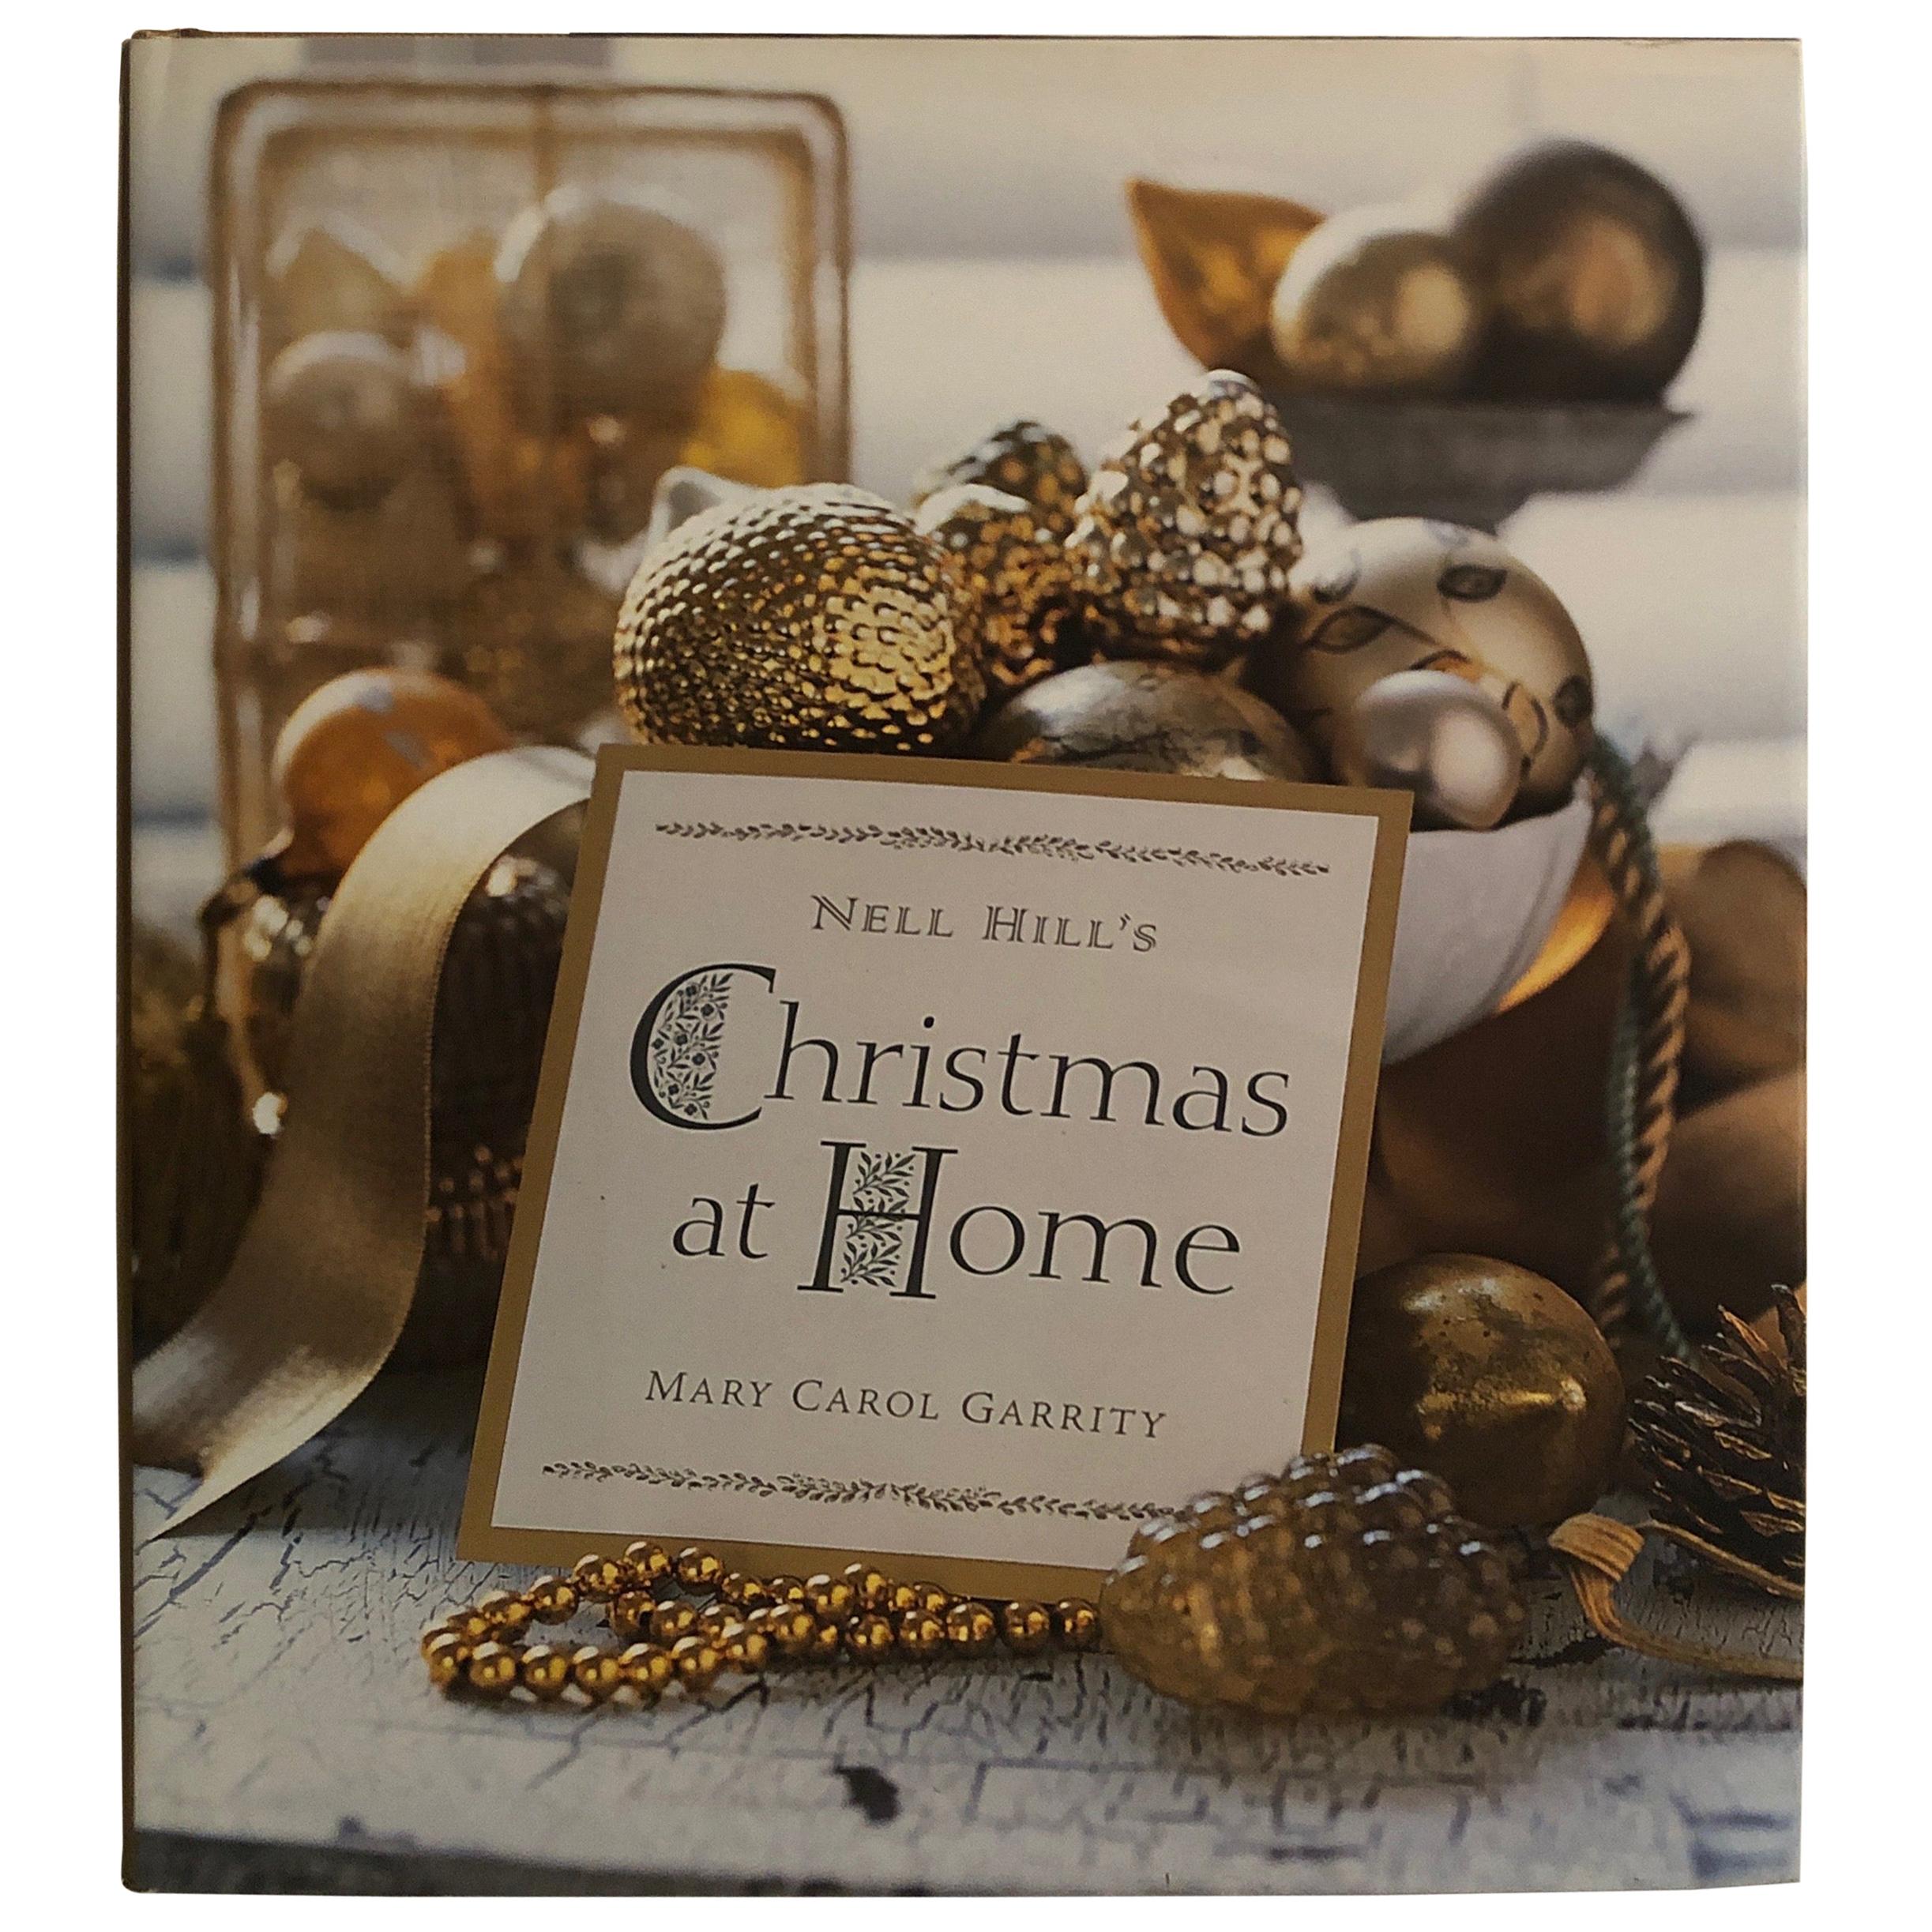 Vintage Coffee Table Decorating Book Christmas at Home by Mary Carol Garrity